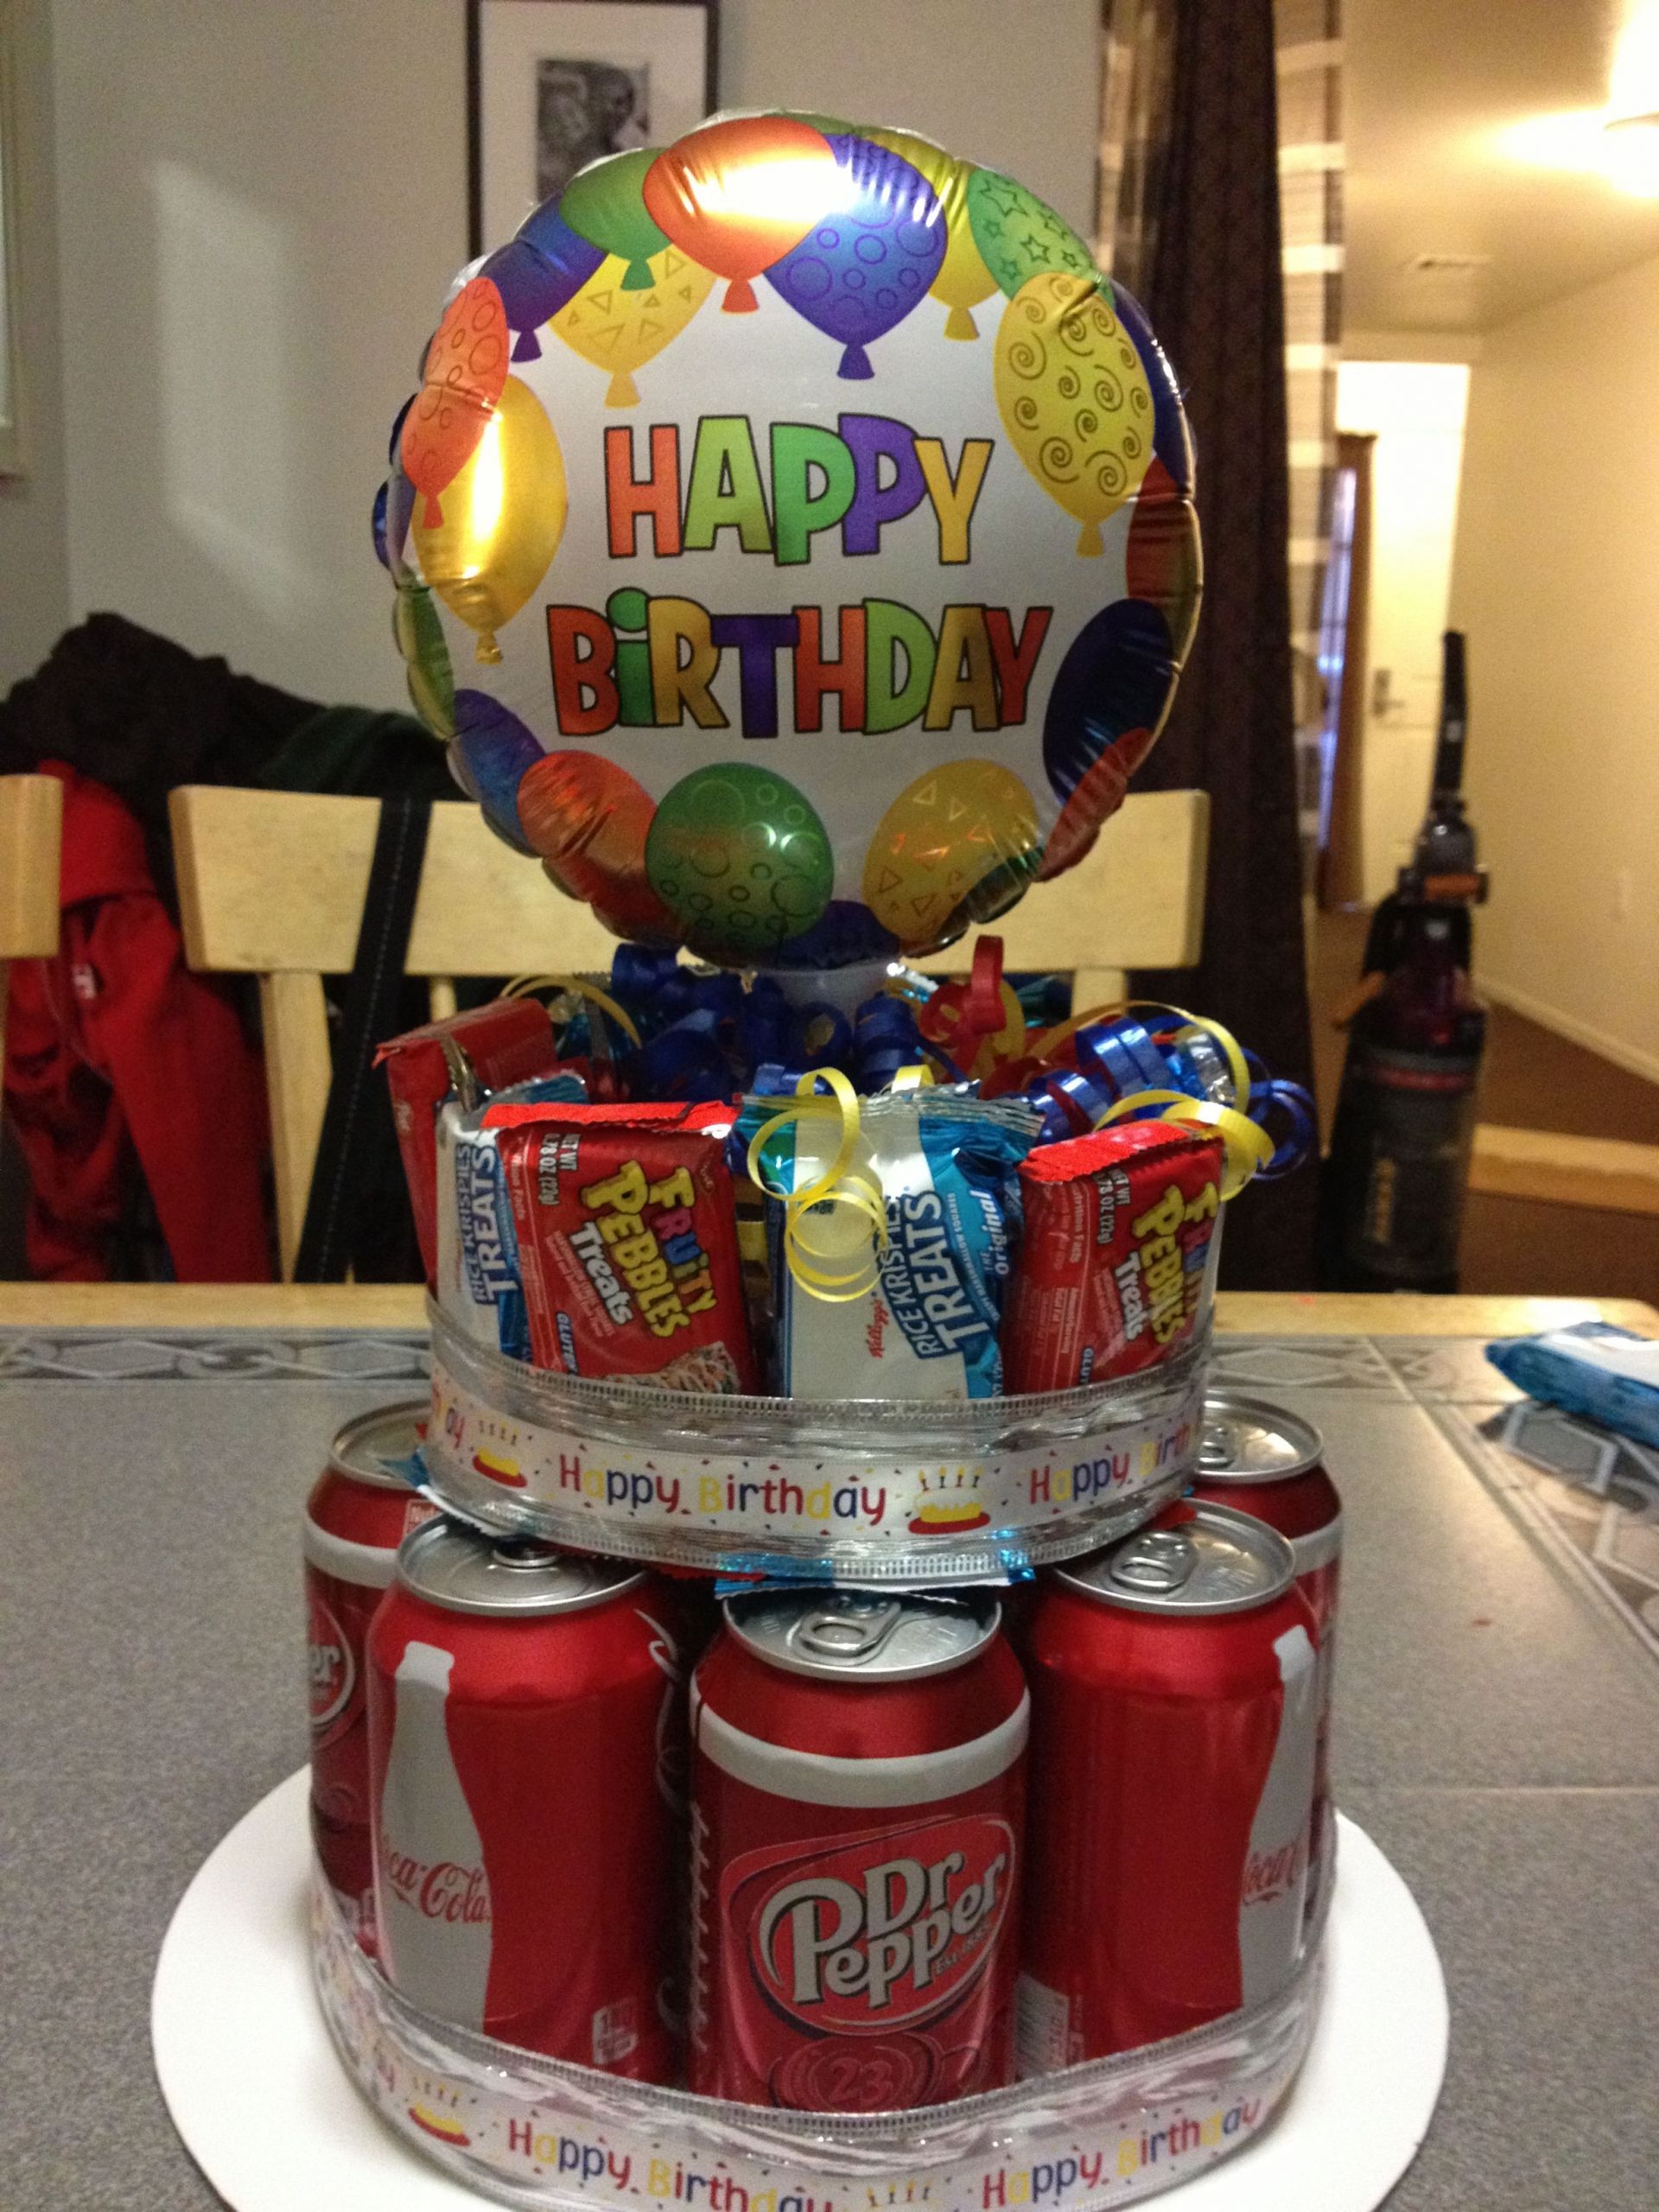 14 Year Old Boy Birthday Gift Ideas
 Birthday cake for my 14 year old son I got this idea from